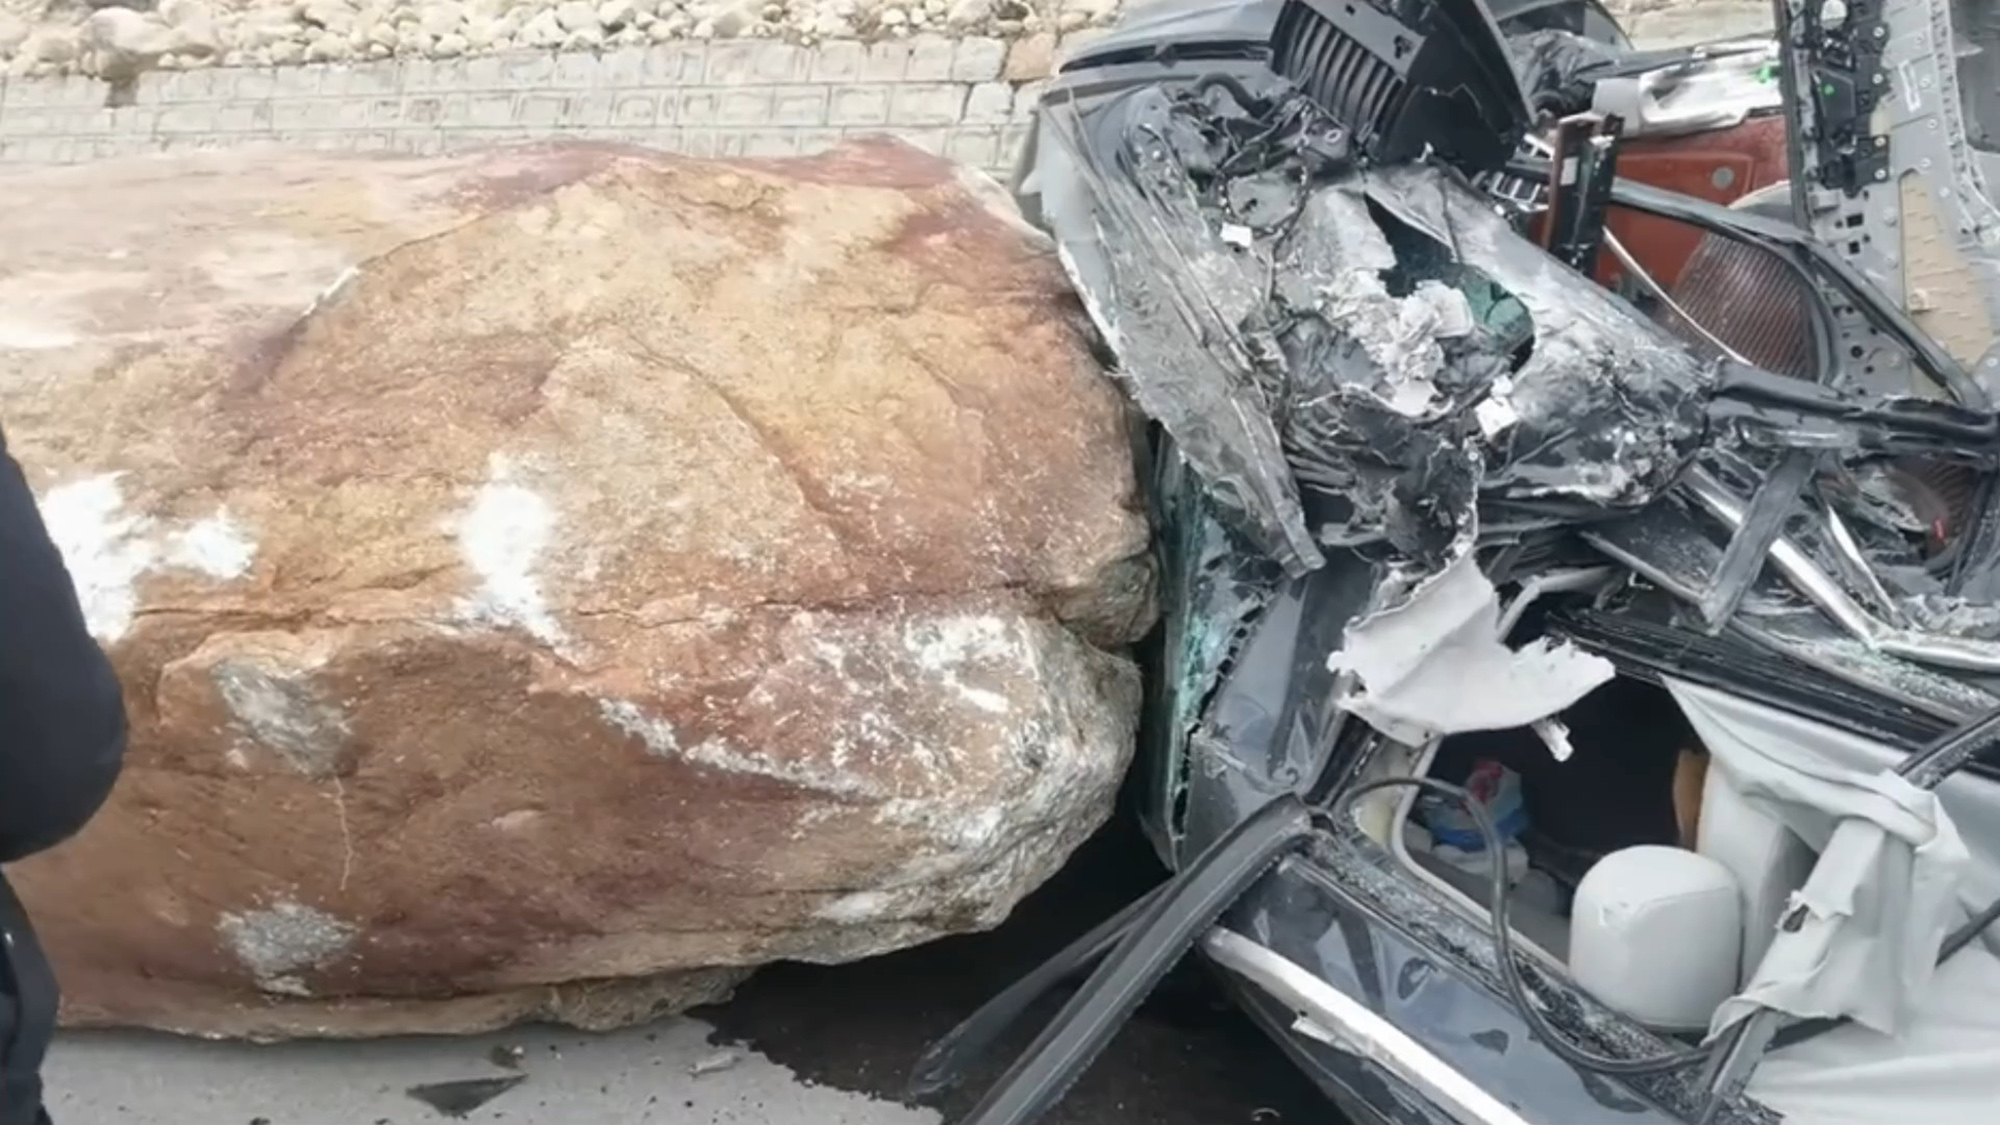 Read more about the article Landslide Rock Crushes SUV